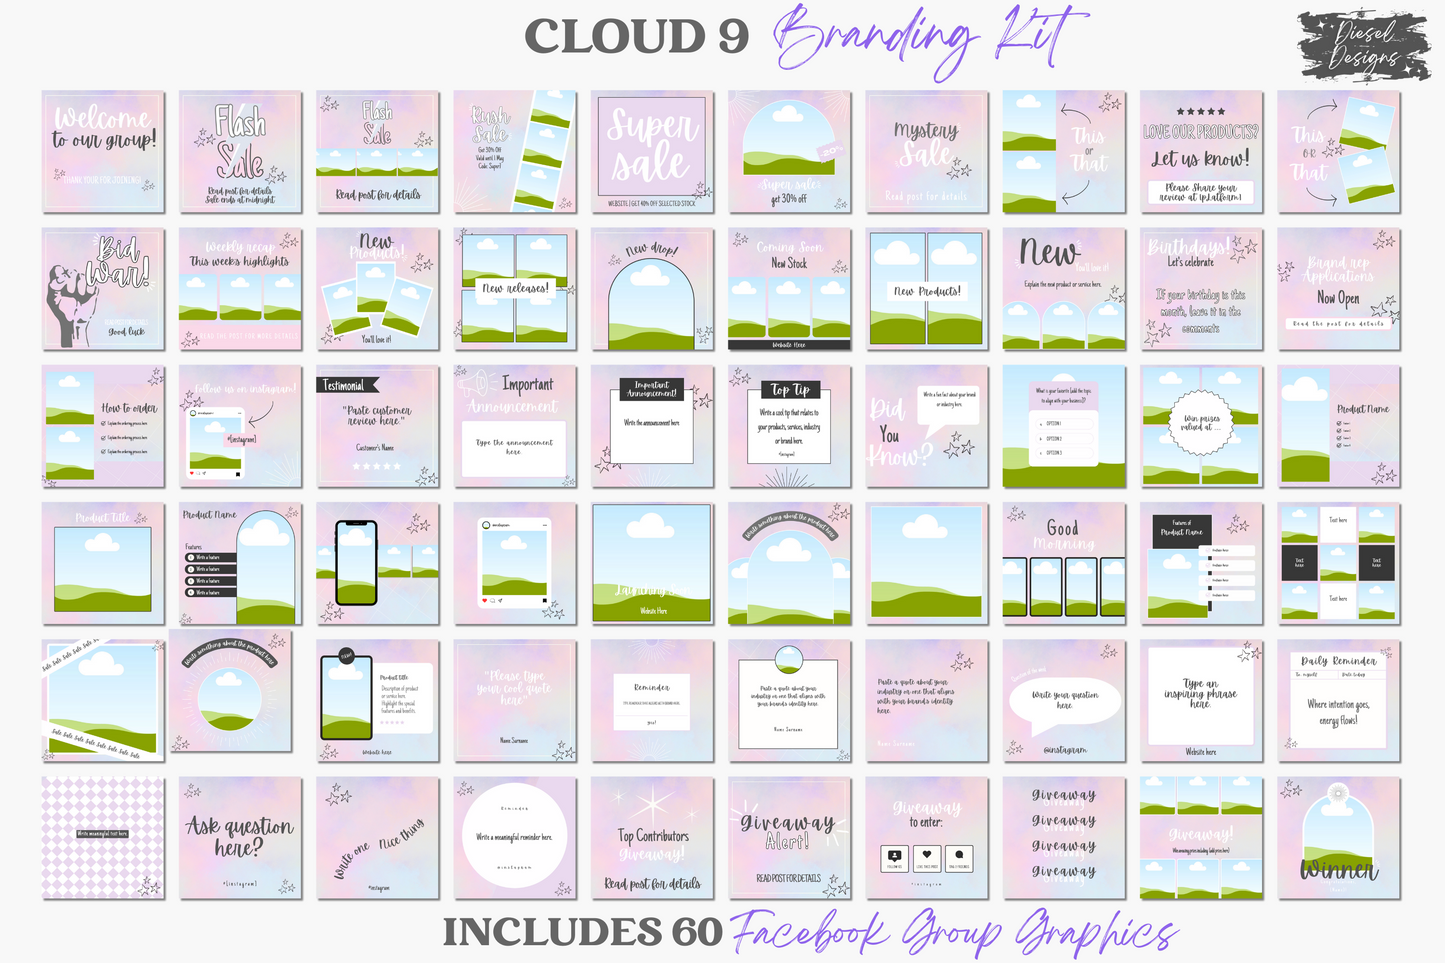 Cloud 9 Facebook Group | Facebook Group Kits | Editable graphics included |